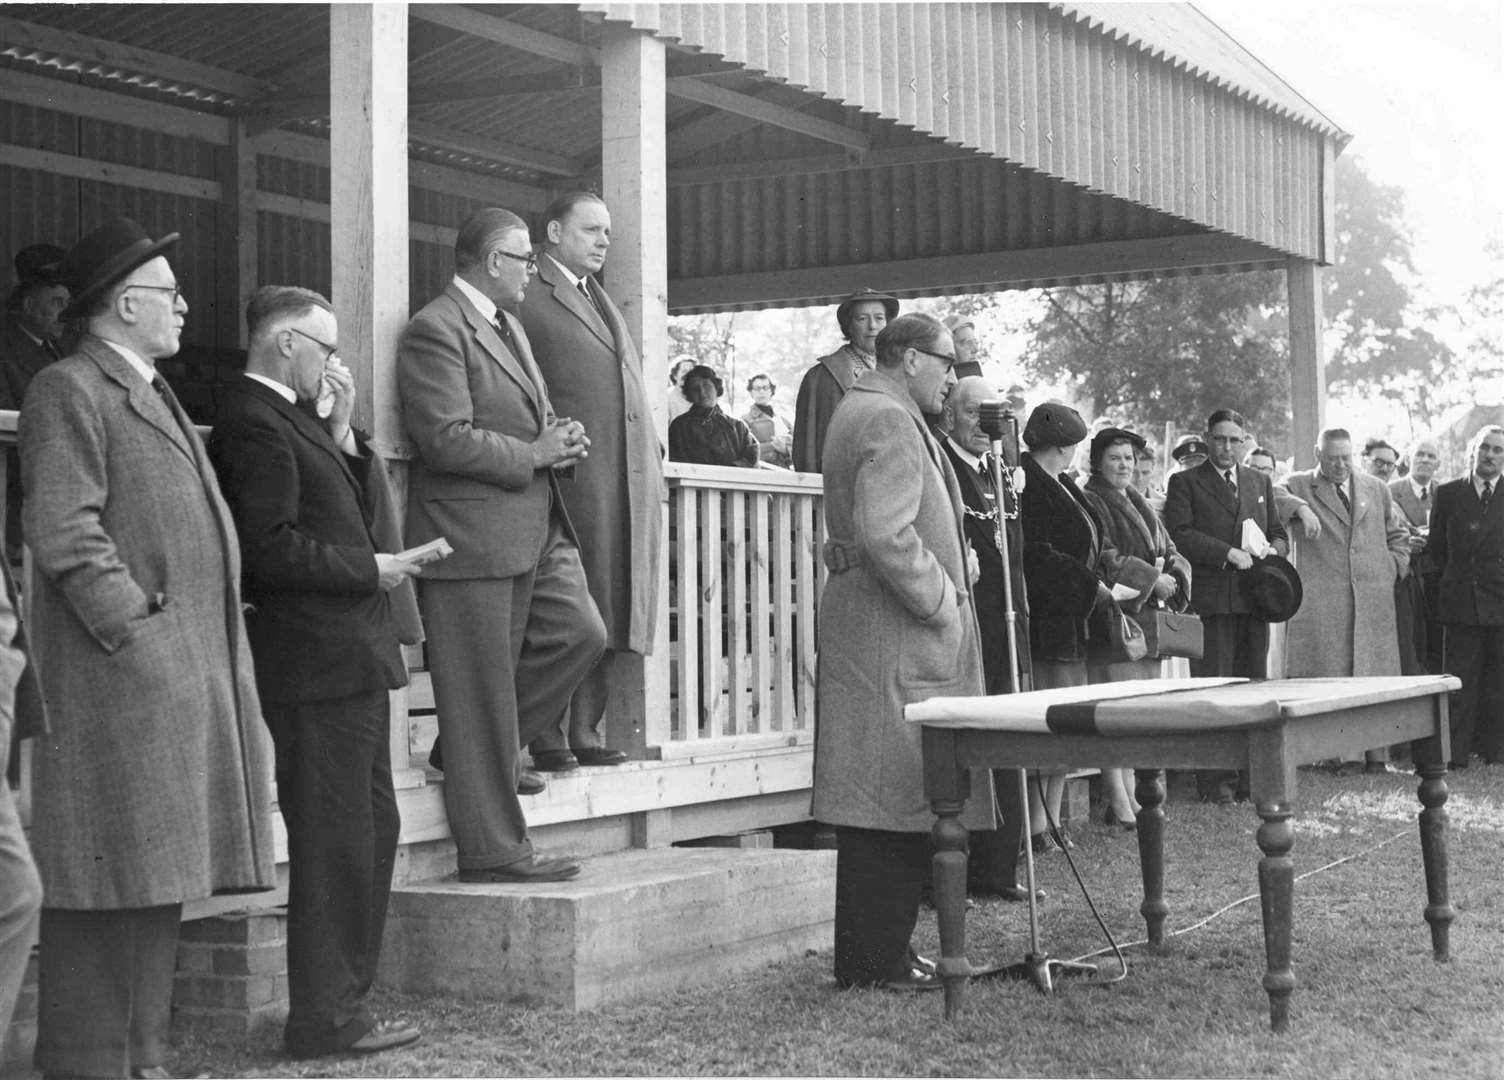 Arthur Marshall, president of the Rugby Union, opens the new stand at The Mote ground in 1957. Image from 'Images of Maidstone'